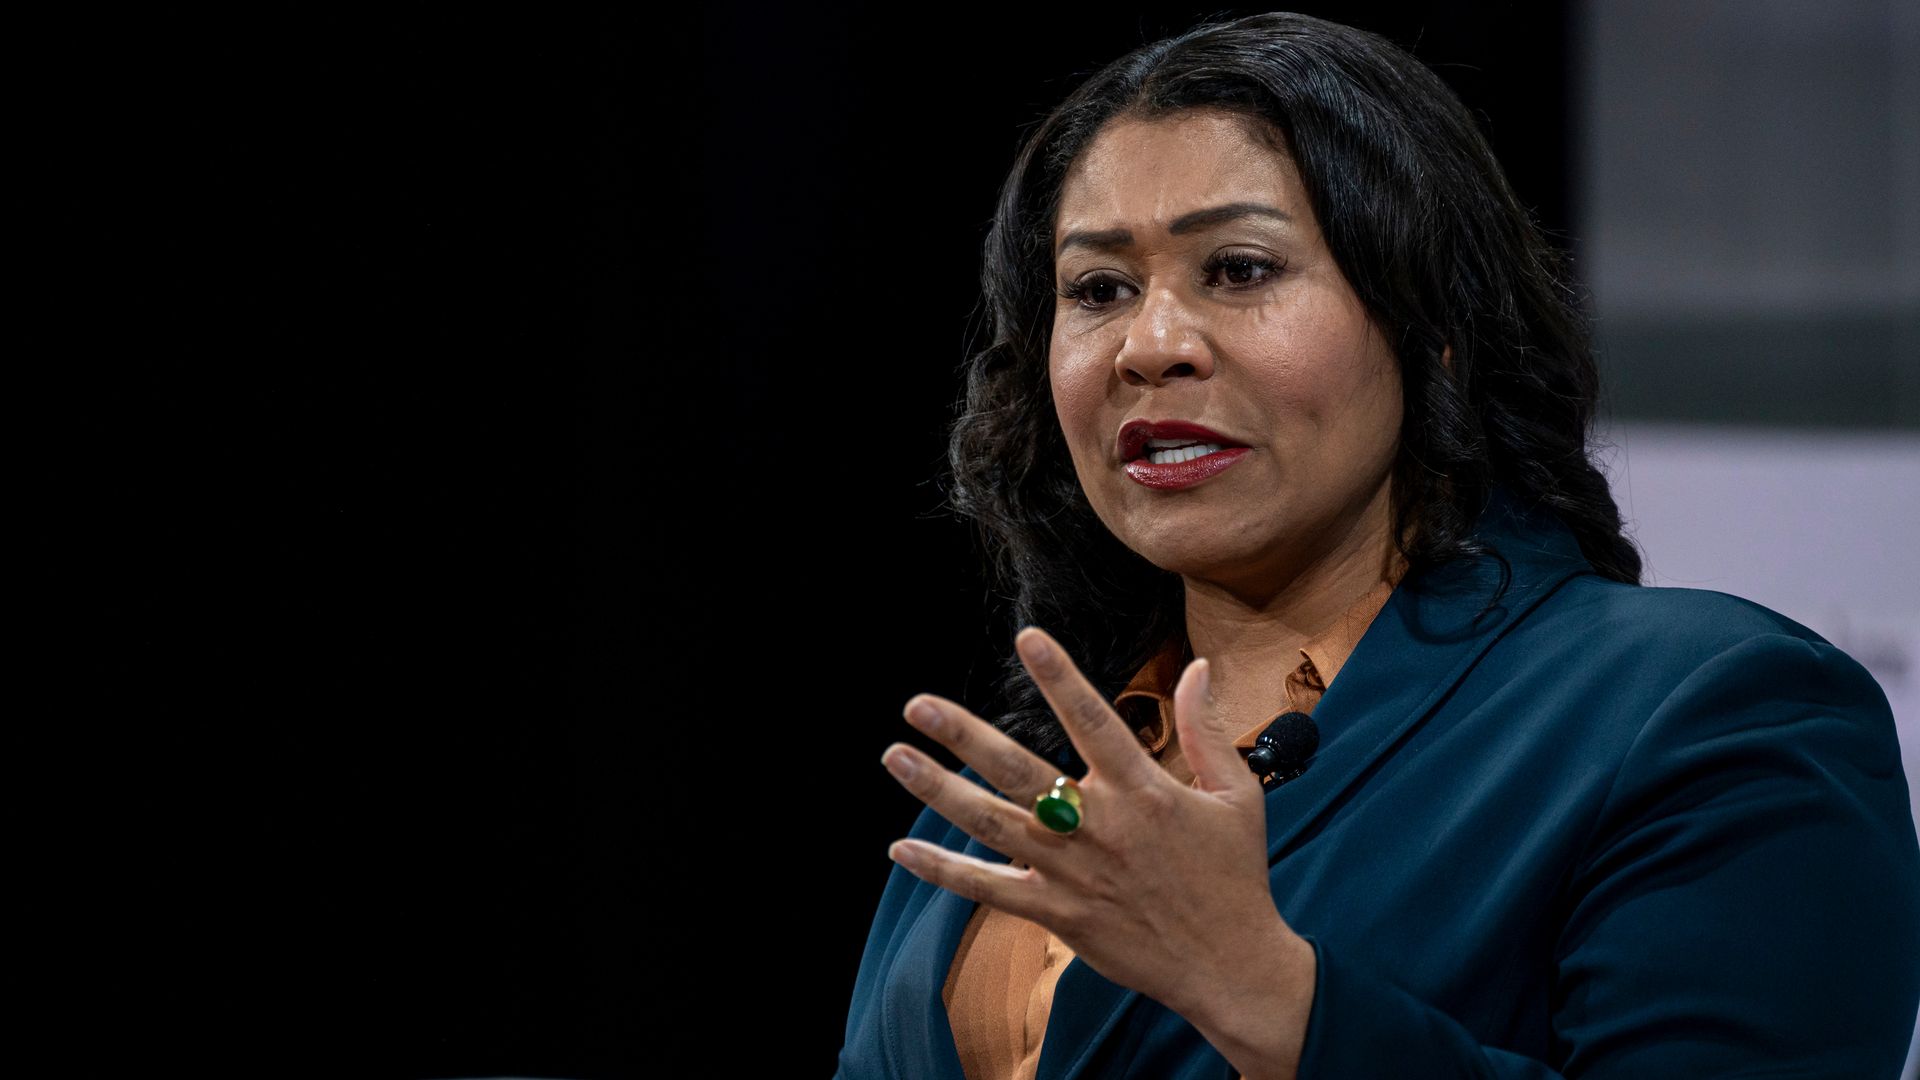 Photo of London Breed speaking on a stage while gesturing with her left hand